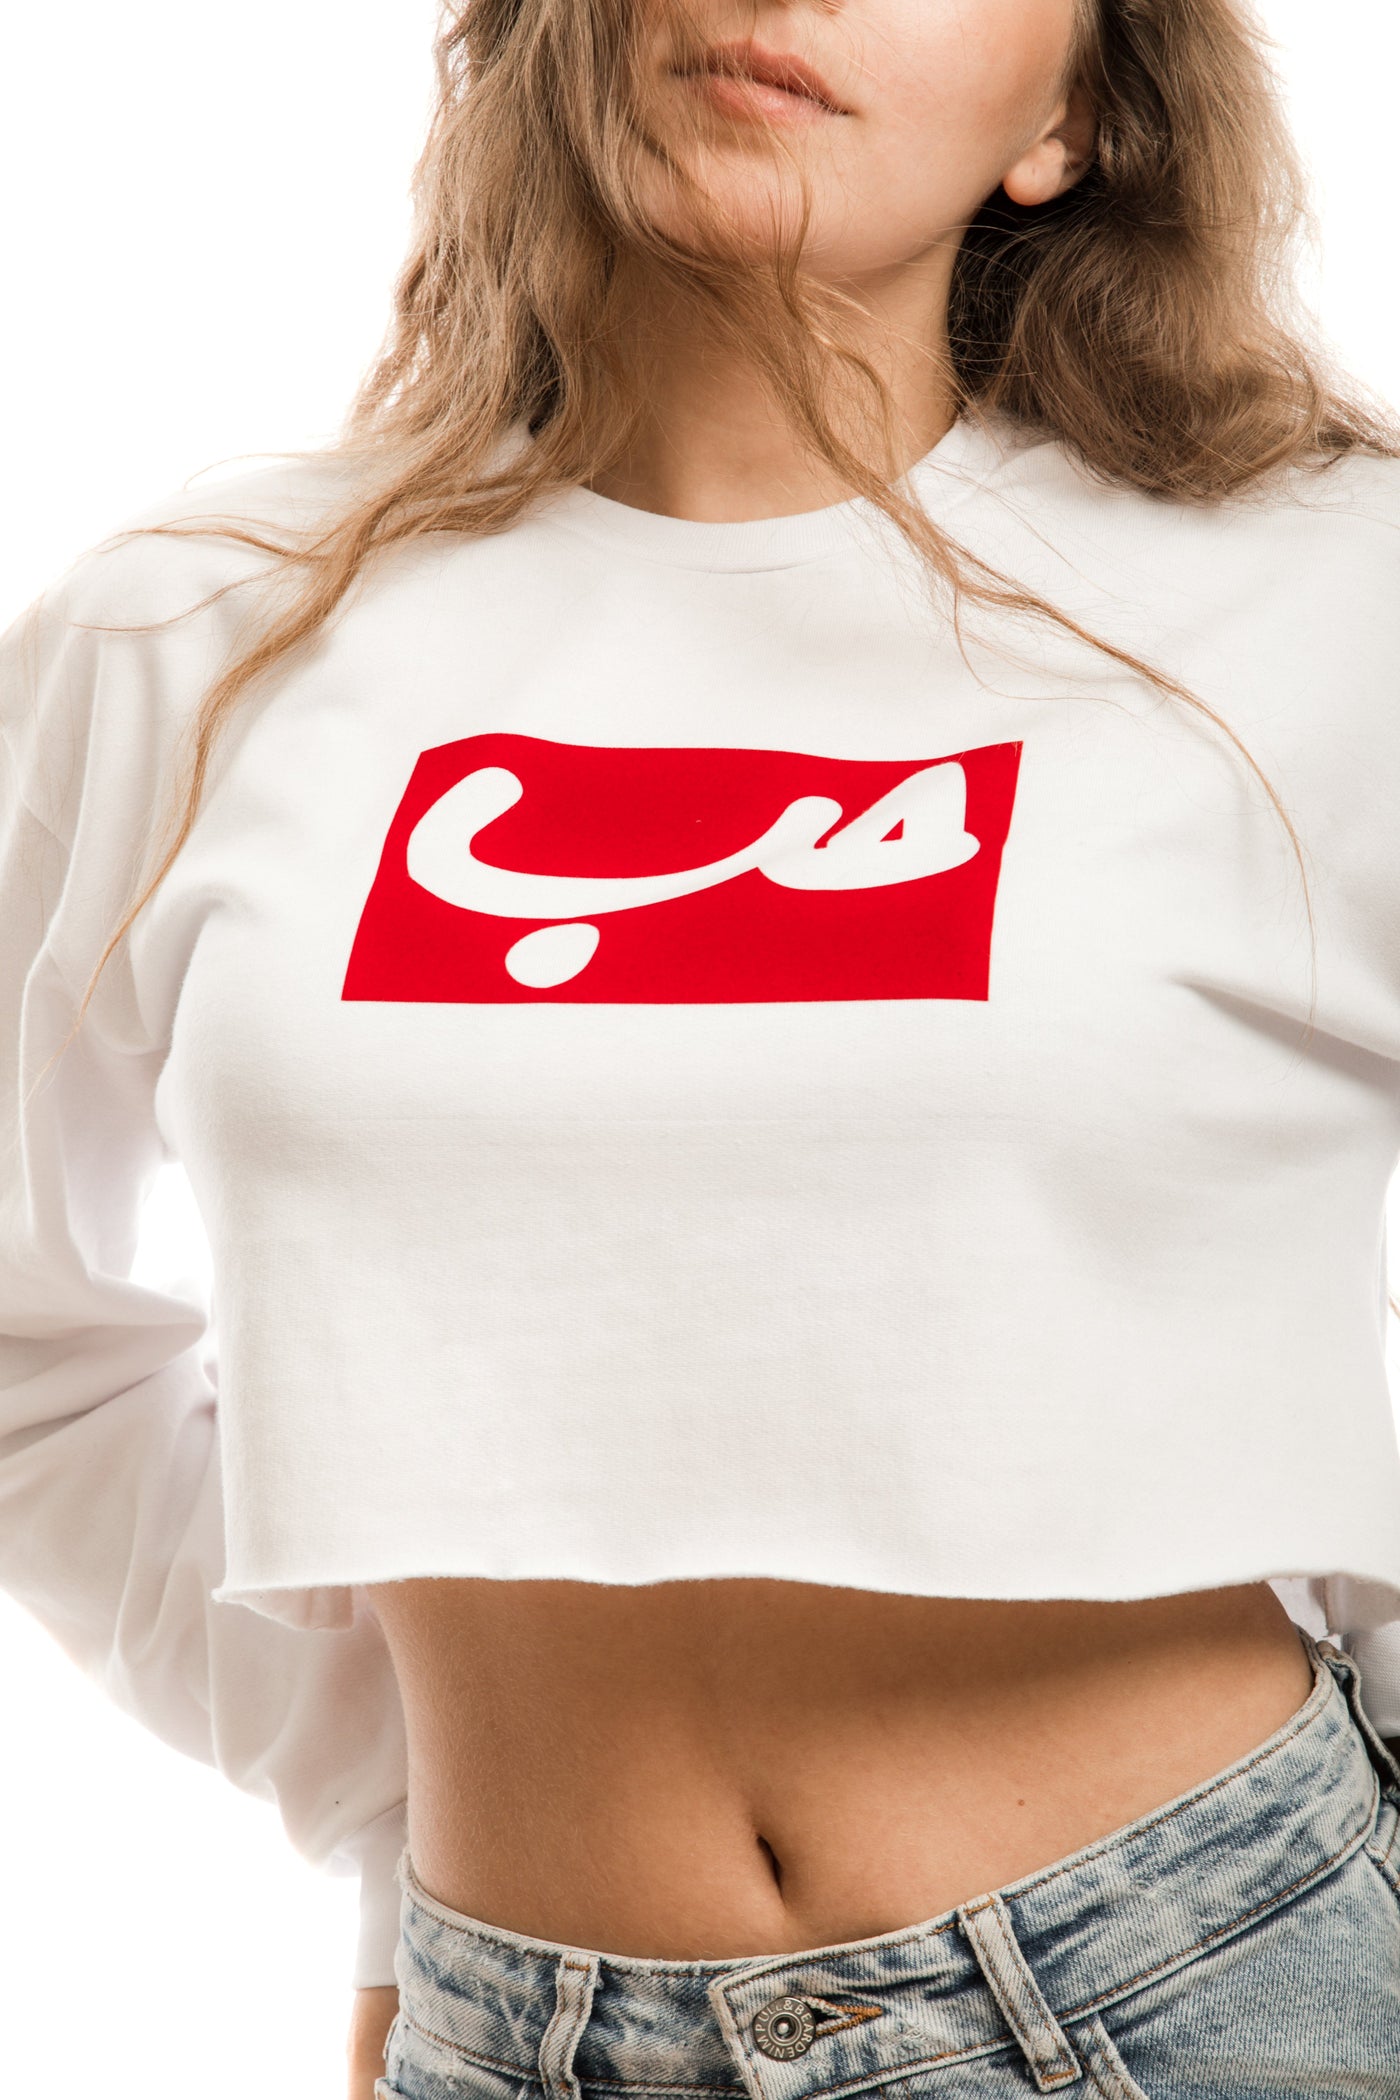 young adult female wearing white crop sweater with hobb written in arabic حب in white and in a red frame in the center of the crop sweater along with jeans